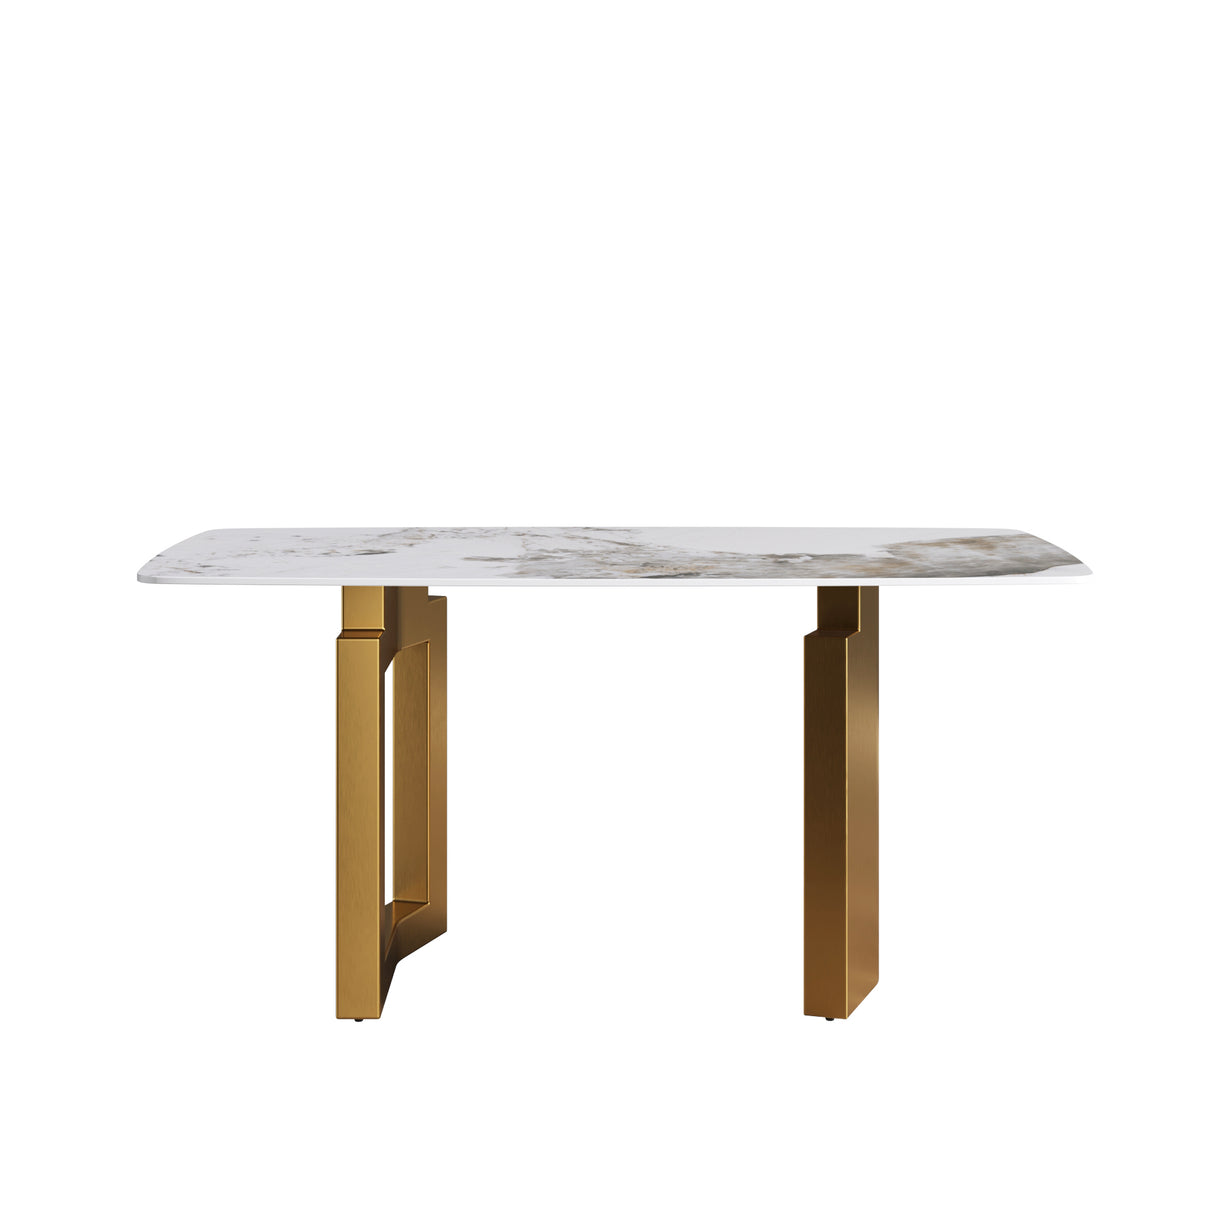 63"Modern artificial stone pandora white curved golden metal leg dining table -6 people - Home Elegance USA